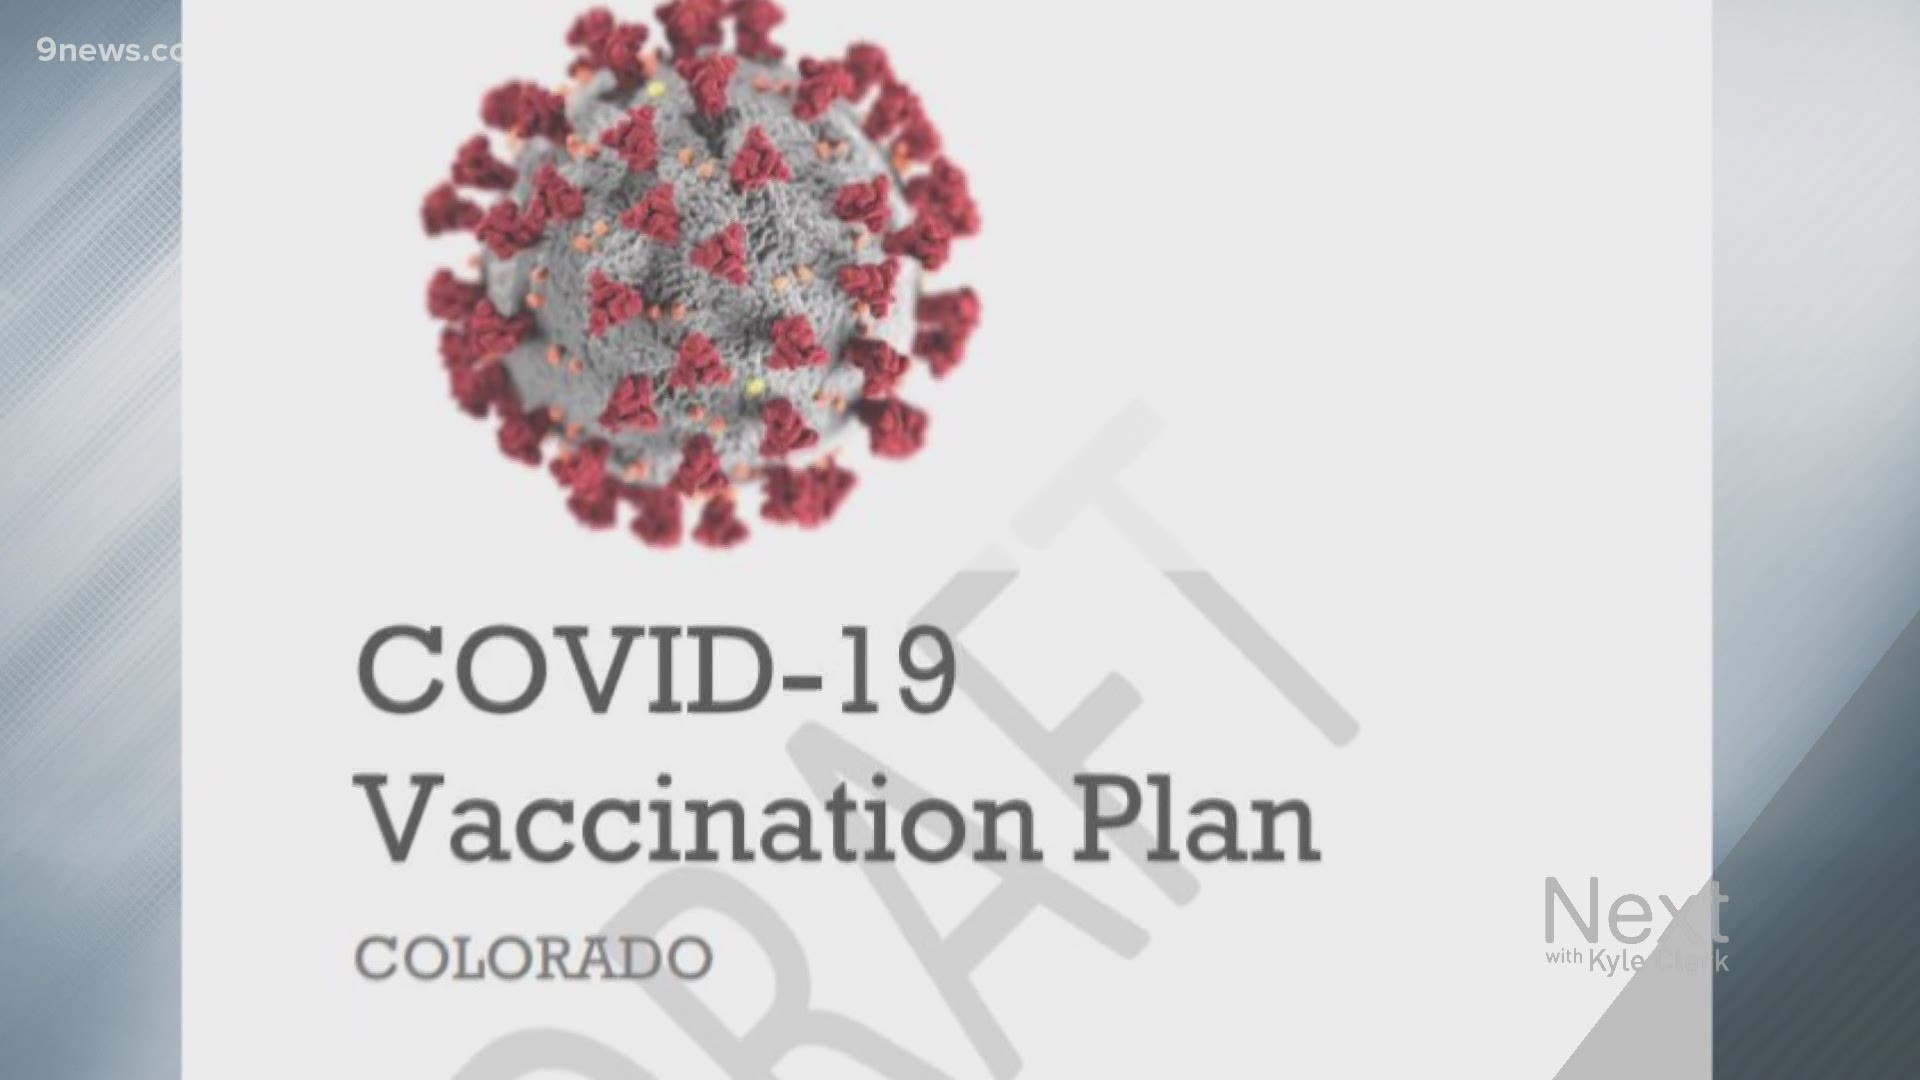 Pfizer announced Monday it has a vaccine that is at least 90% effective. Once a vaccine is approved, when can Coloradans expect to get it?